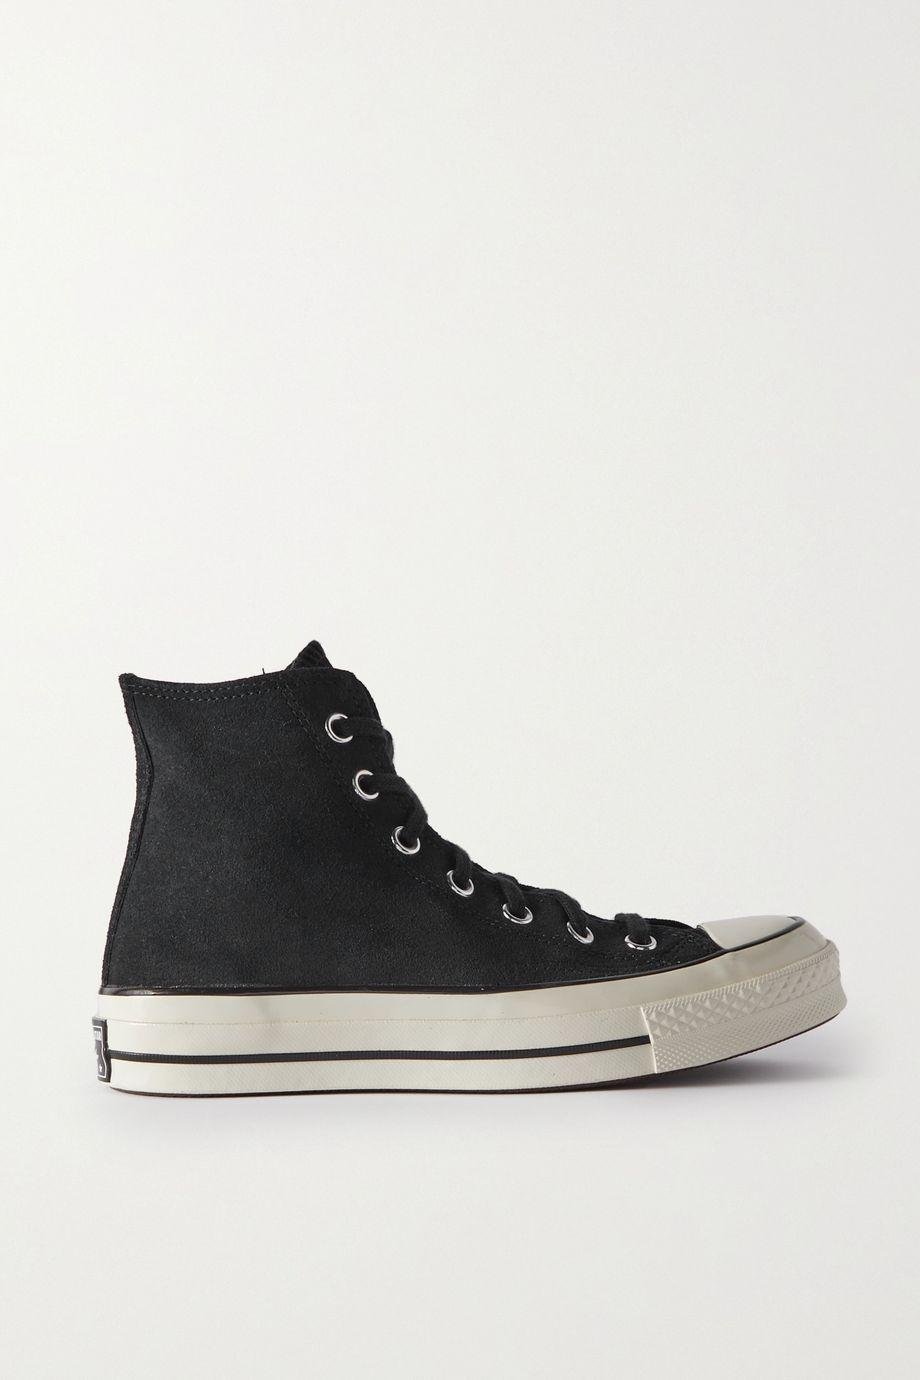 Chuck 70 suede high-top sneakers by CONVERSE | jellibeans